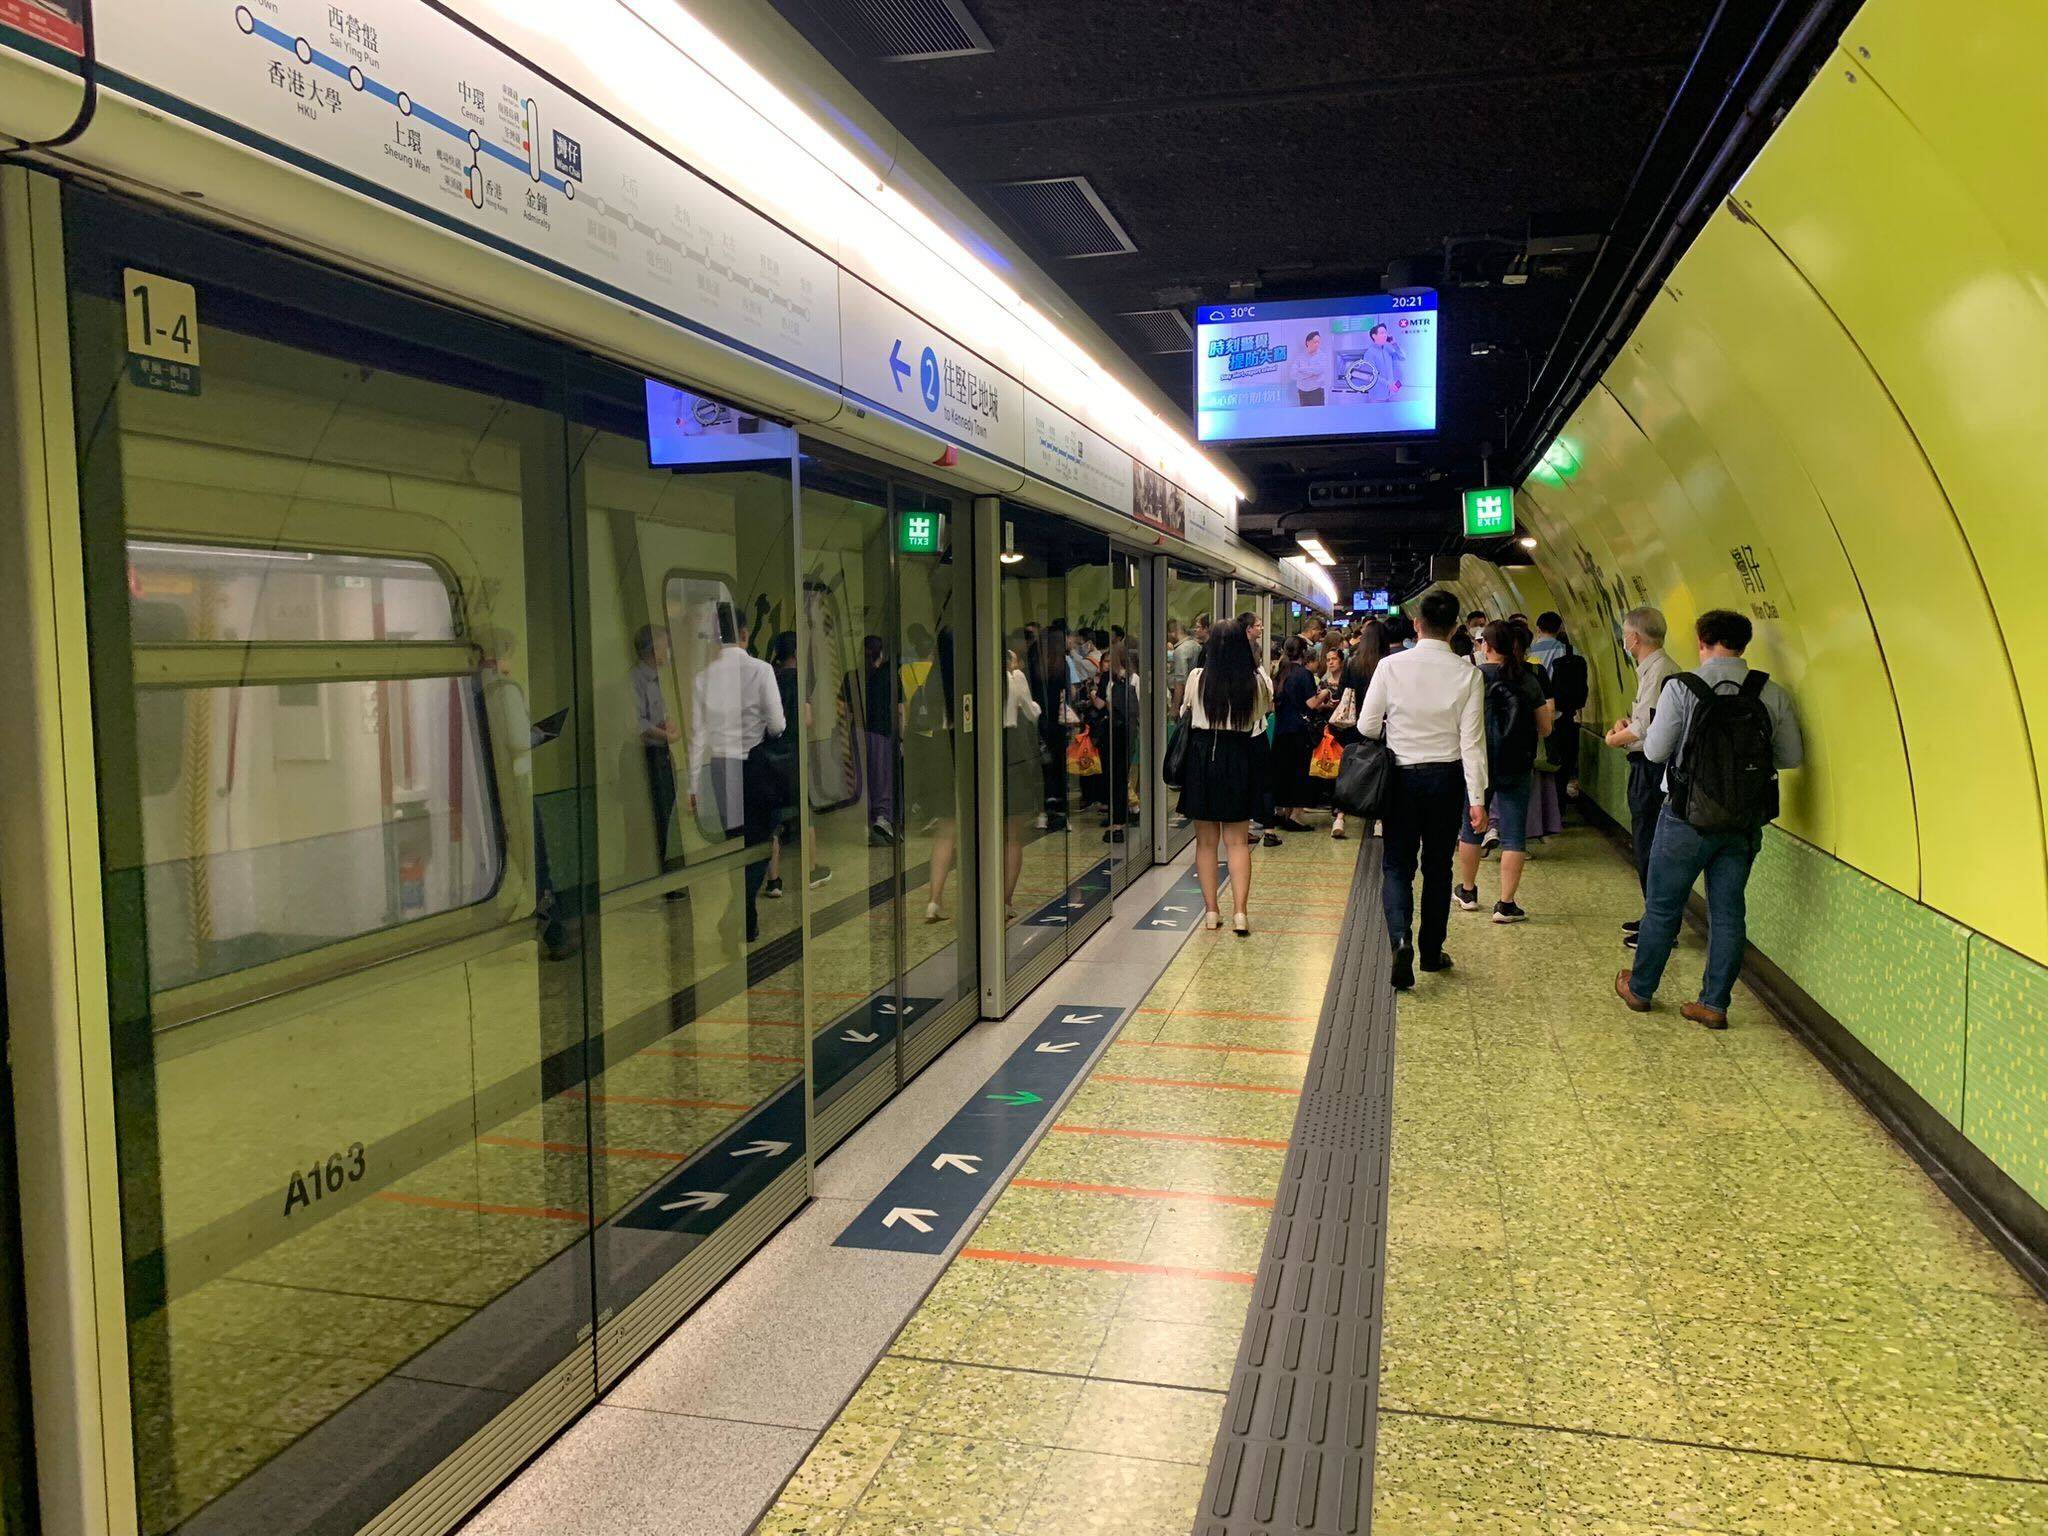 An investigation is focusing on MTR passengers’ use of an emergency exit to leave a carriage and walk on the tracks after train doors failed to open at Wan Chai station. Photo: Anna Verghese